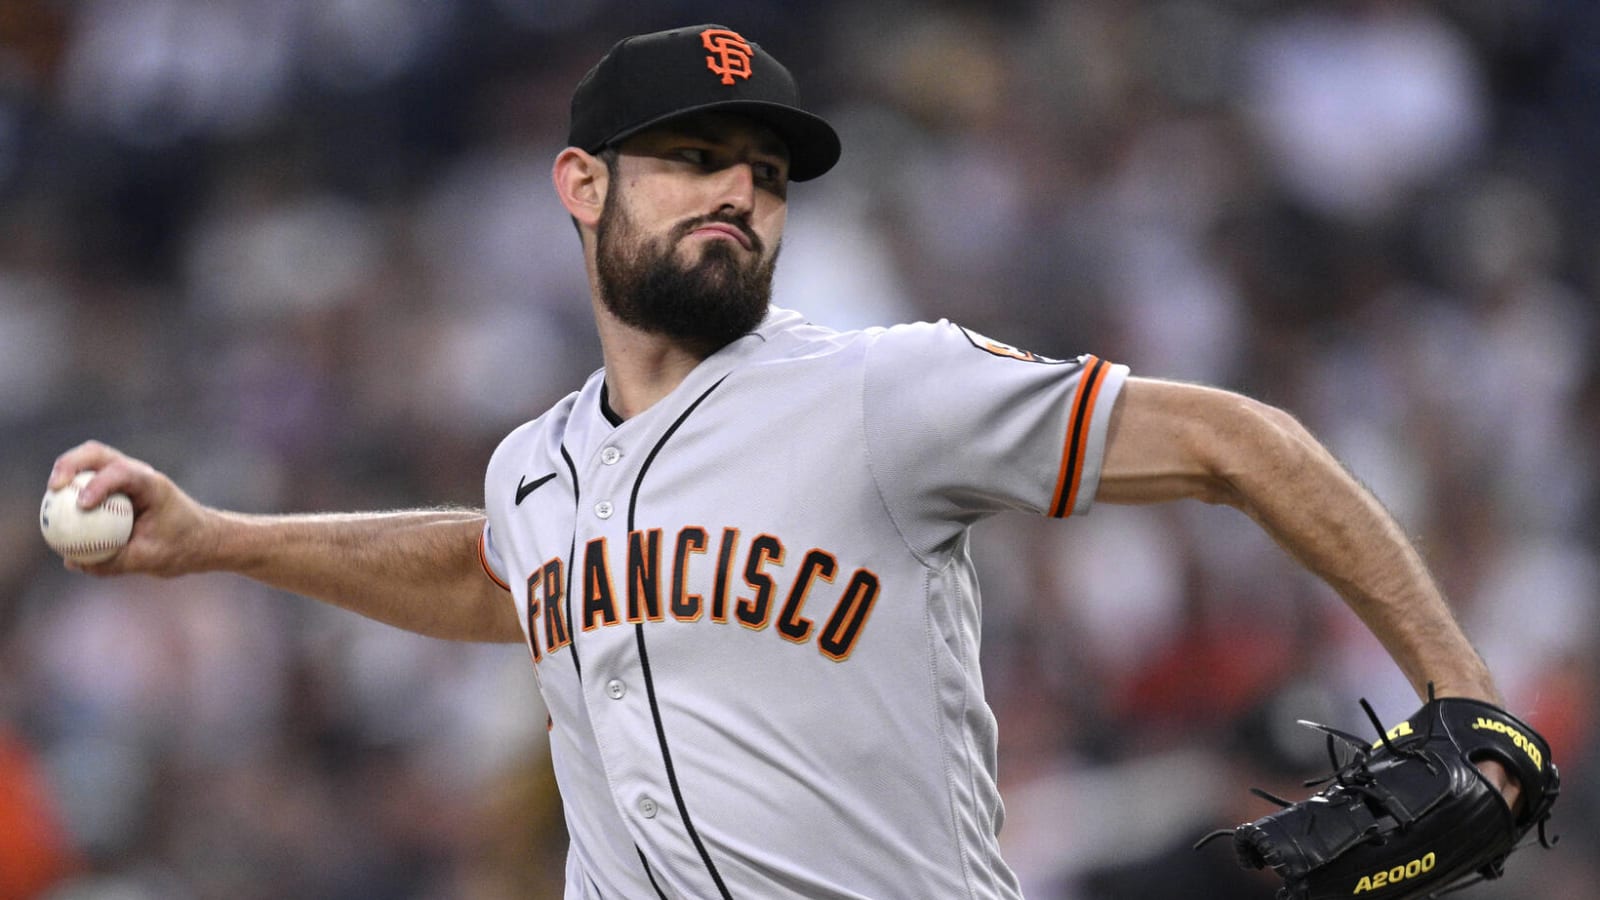 Giants considering trading from group of young pitchers